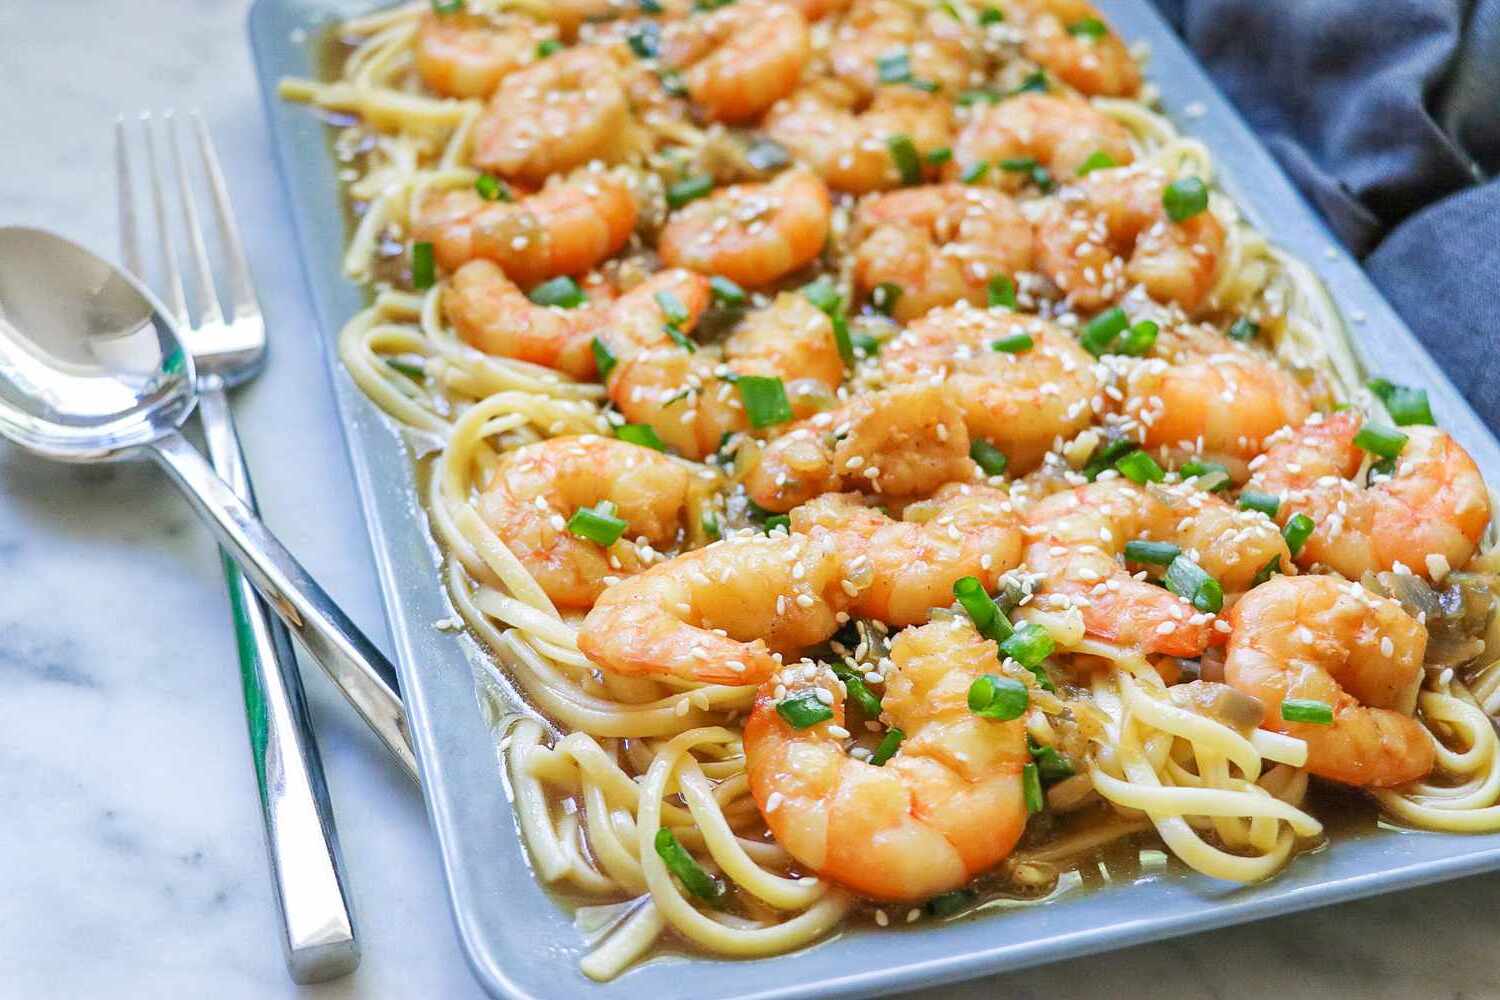 How to Make Shrimp Scampi in the Instant Pot